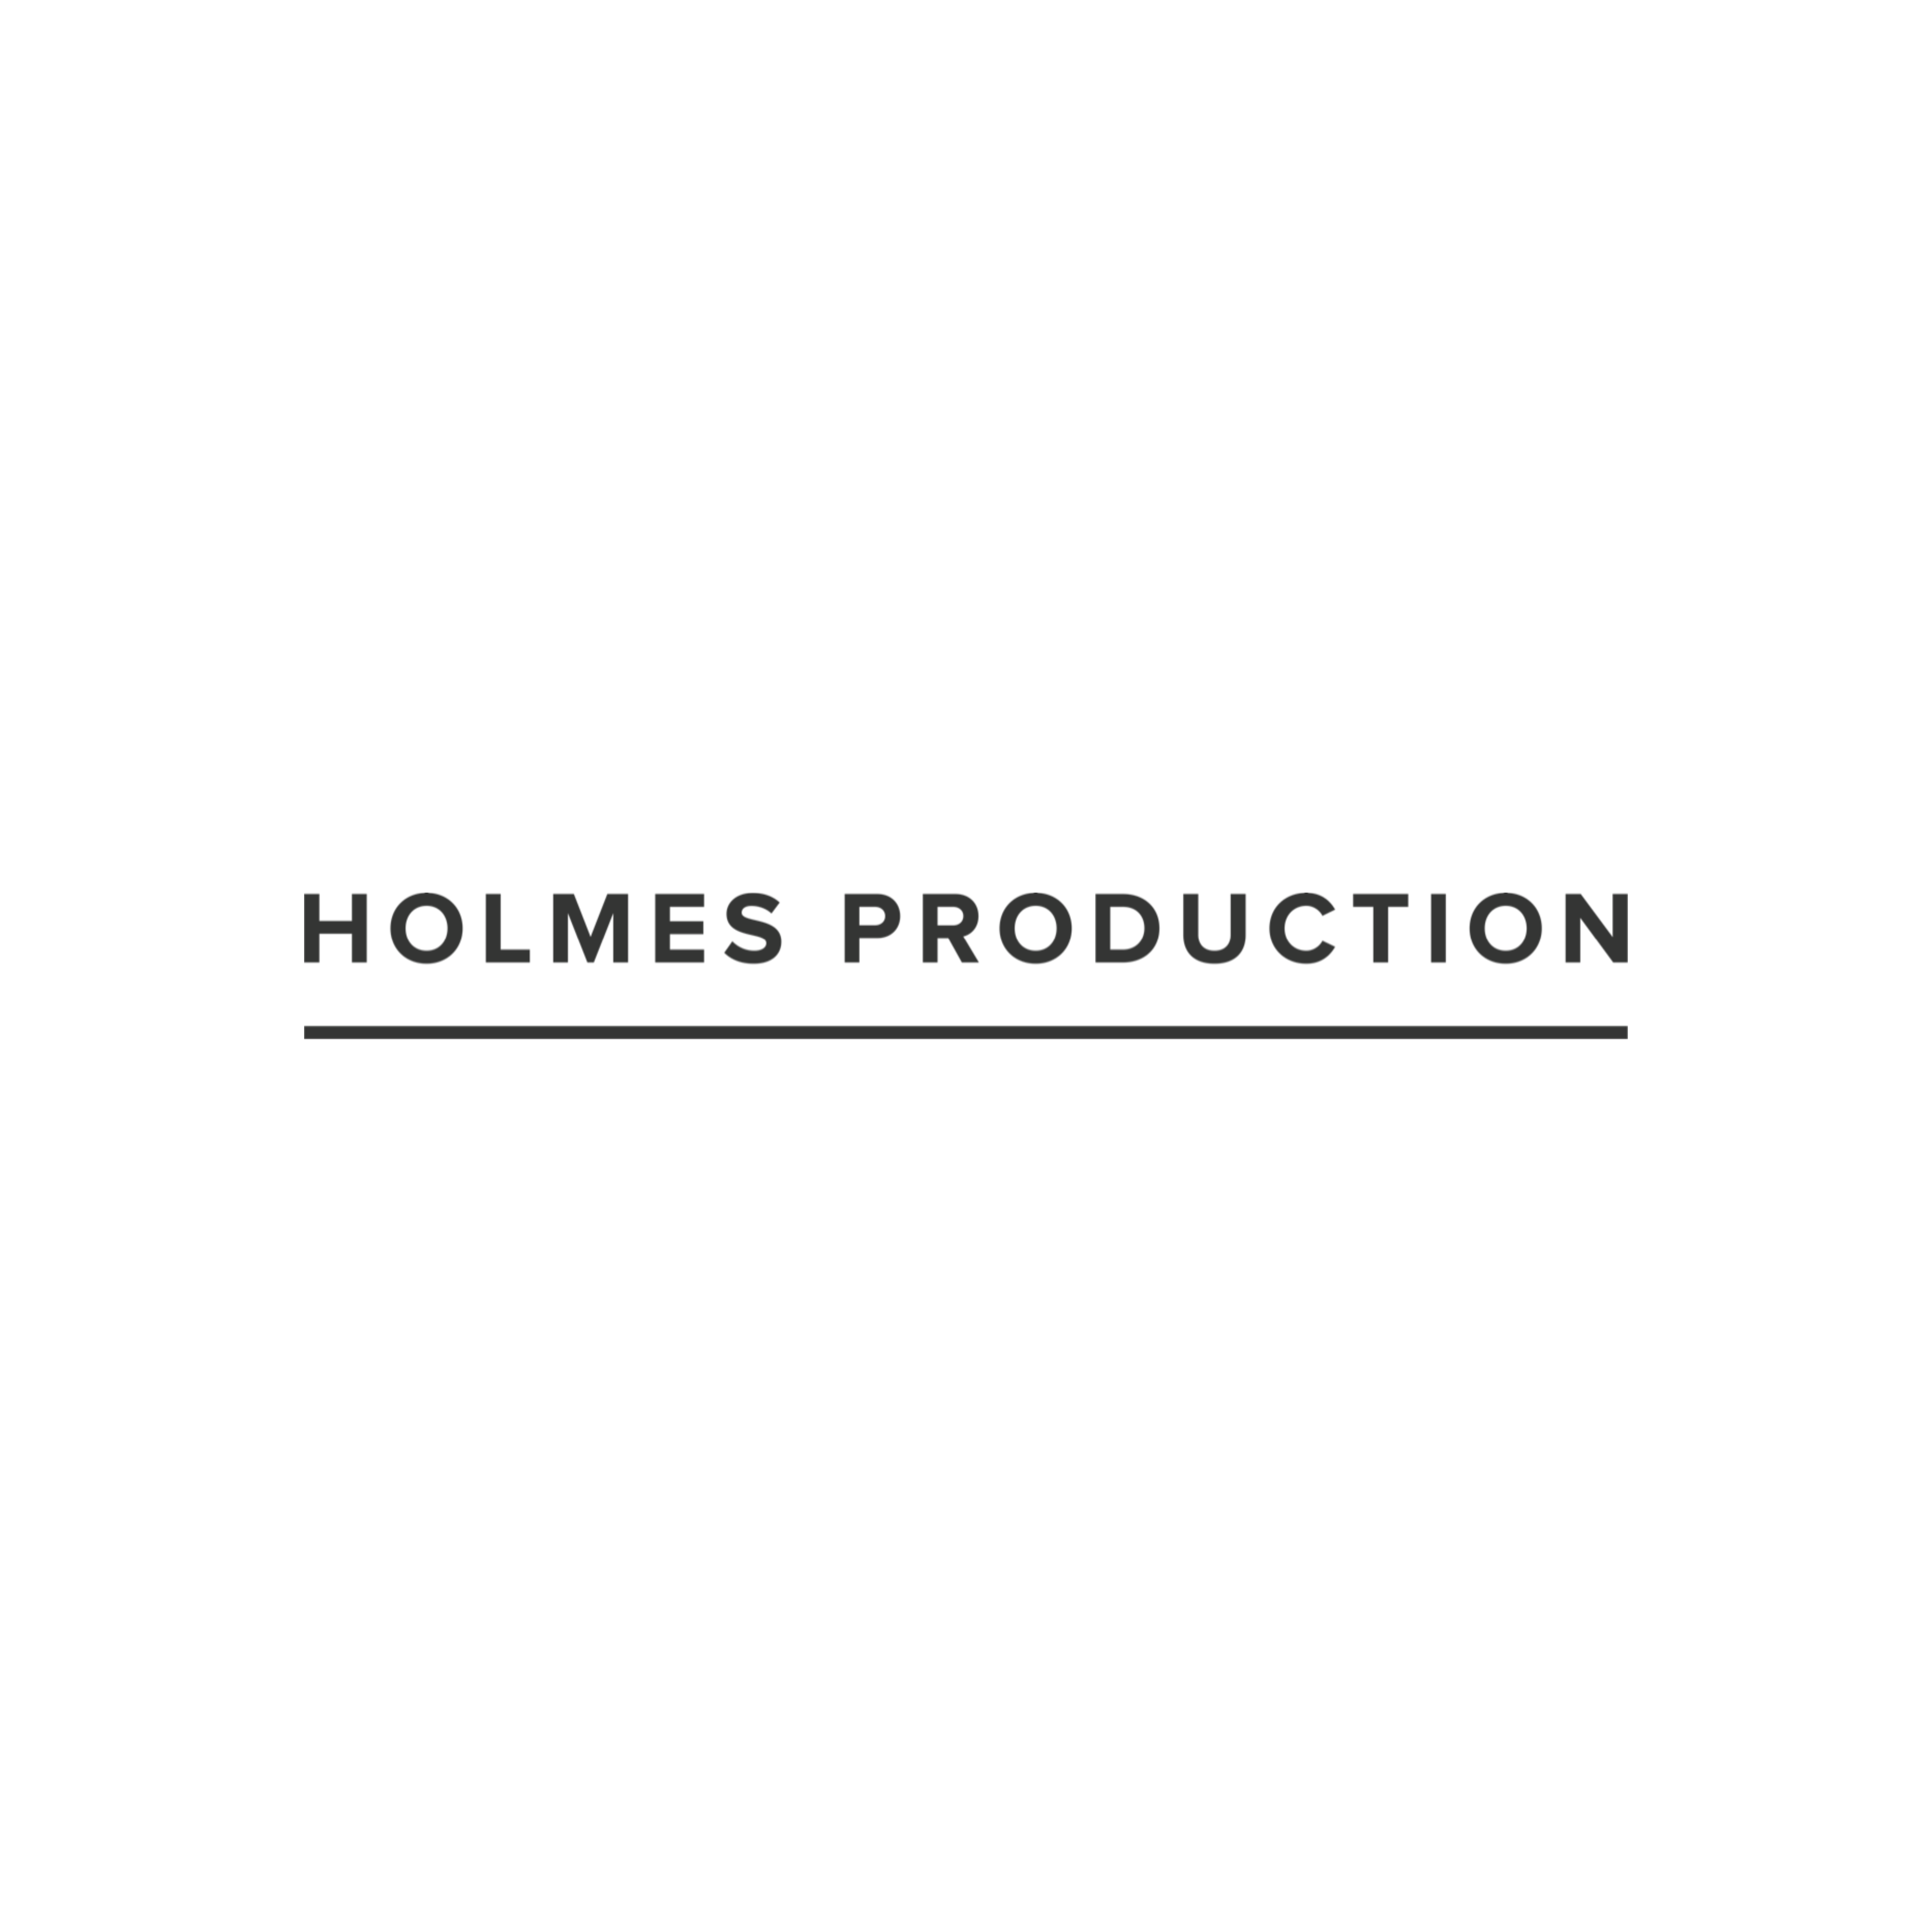 HolmesProduction